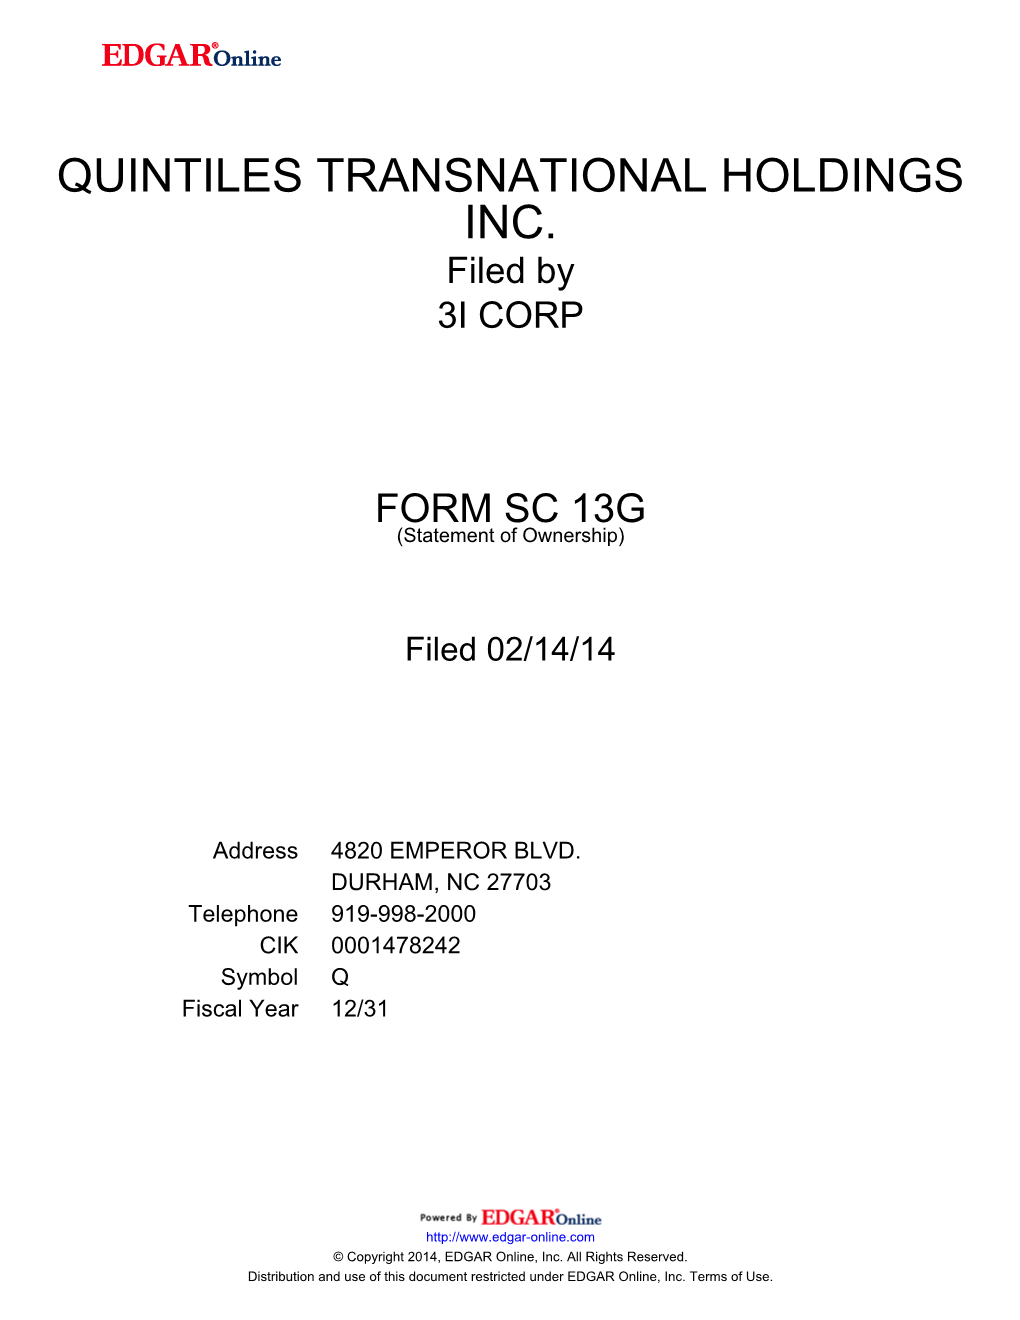 QUINTILES TRANSNATIONAL HOLDINGS INC. Filed by 3I CORP